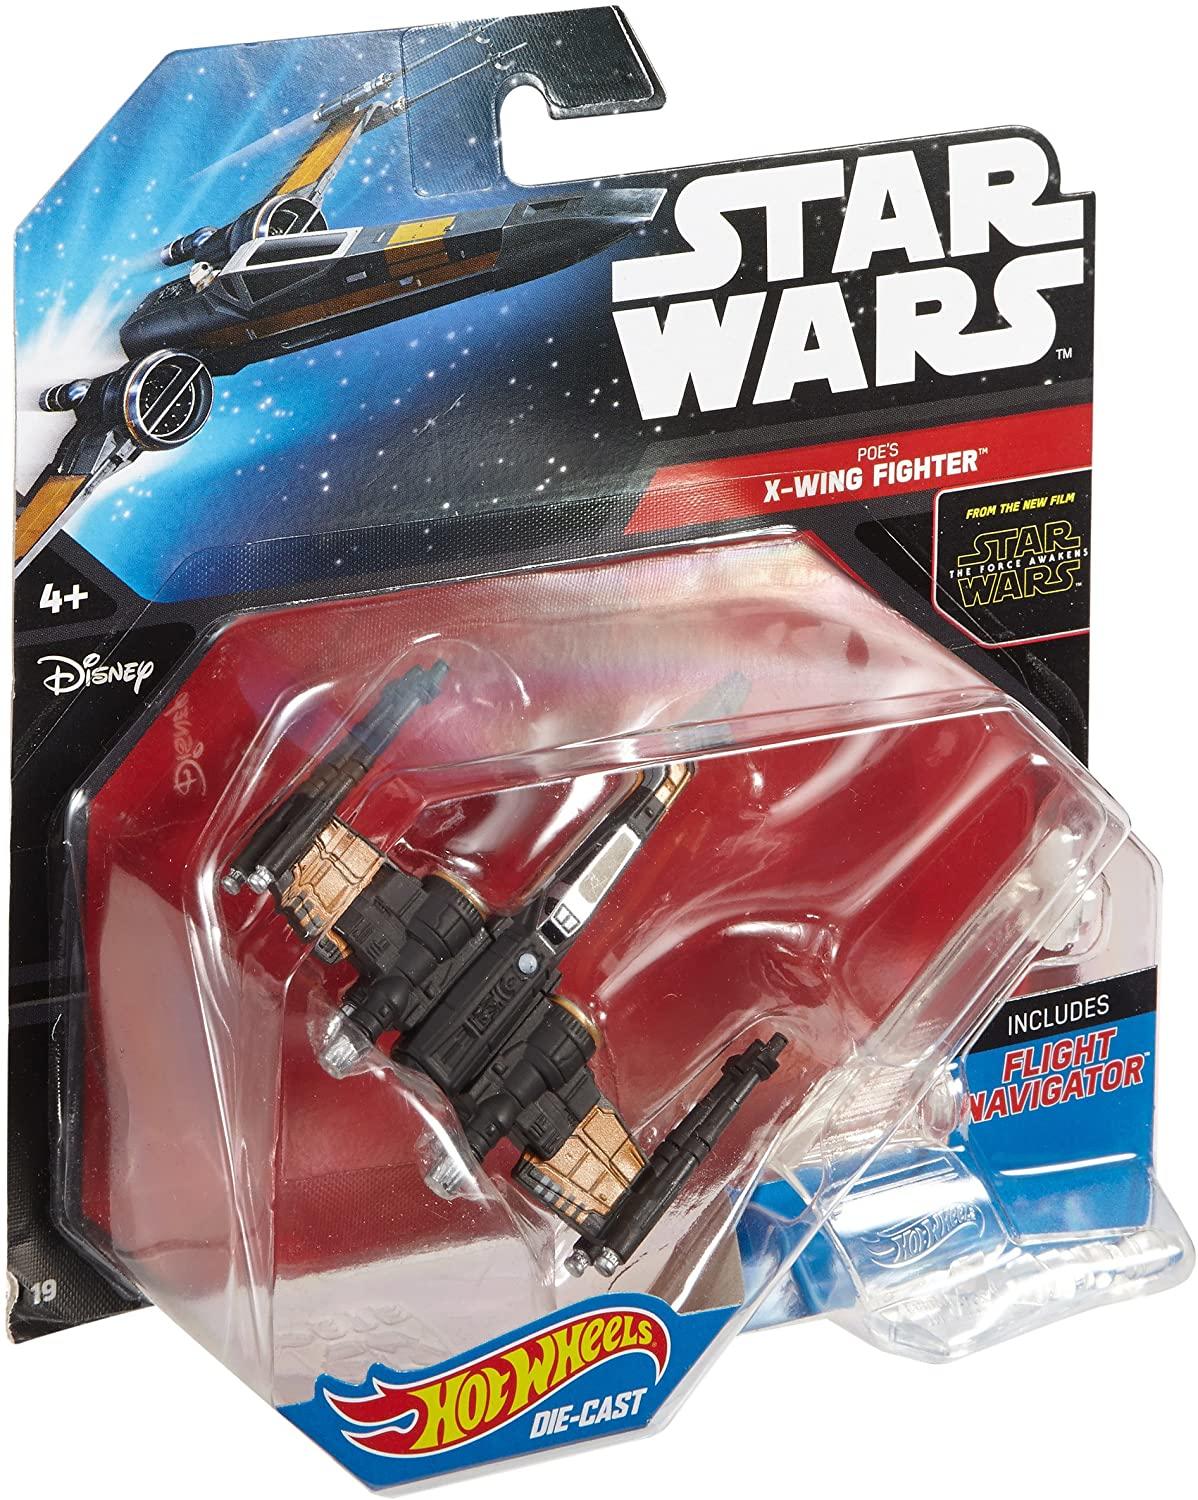 Star Wars Poe's X-Wing Fighter from the film ' the force awakens' made by Hot Wheels